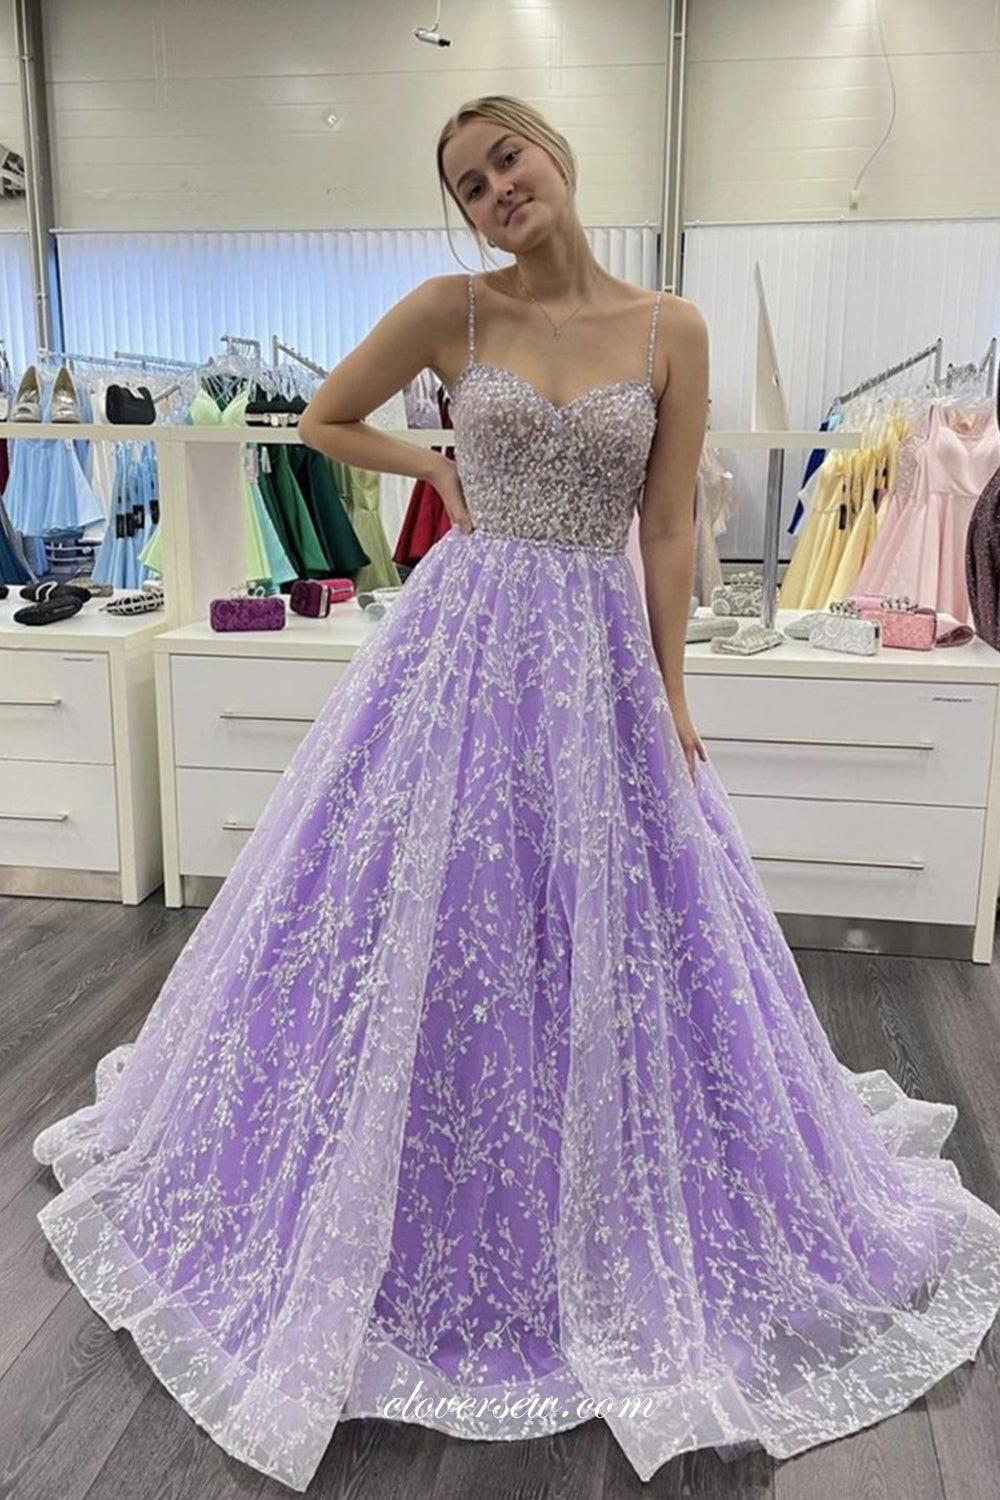 Lilac Lace Beaded Spaghetti Strap A-line Prom Dresses, CP0826